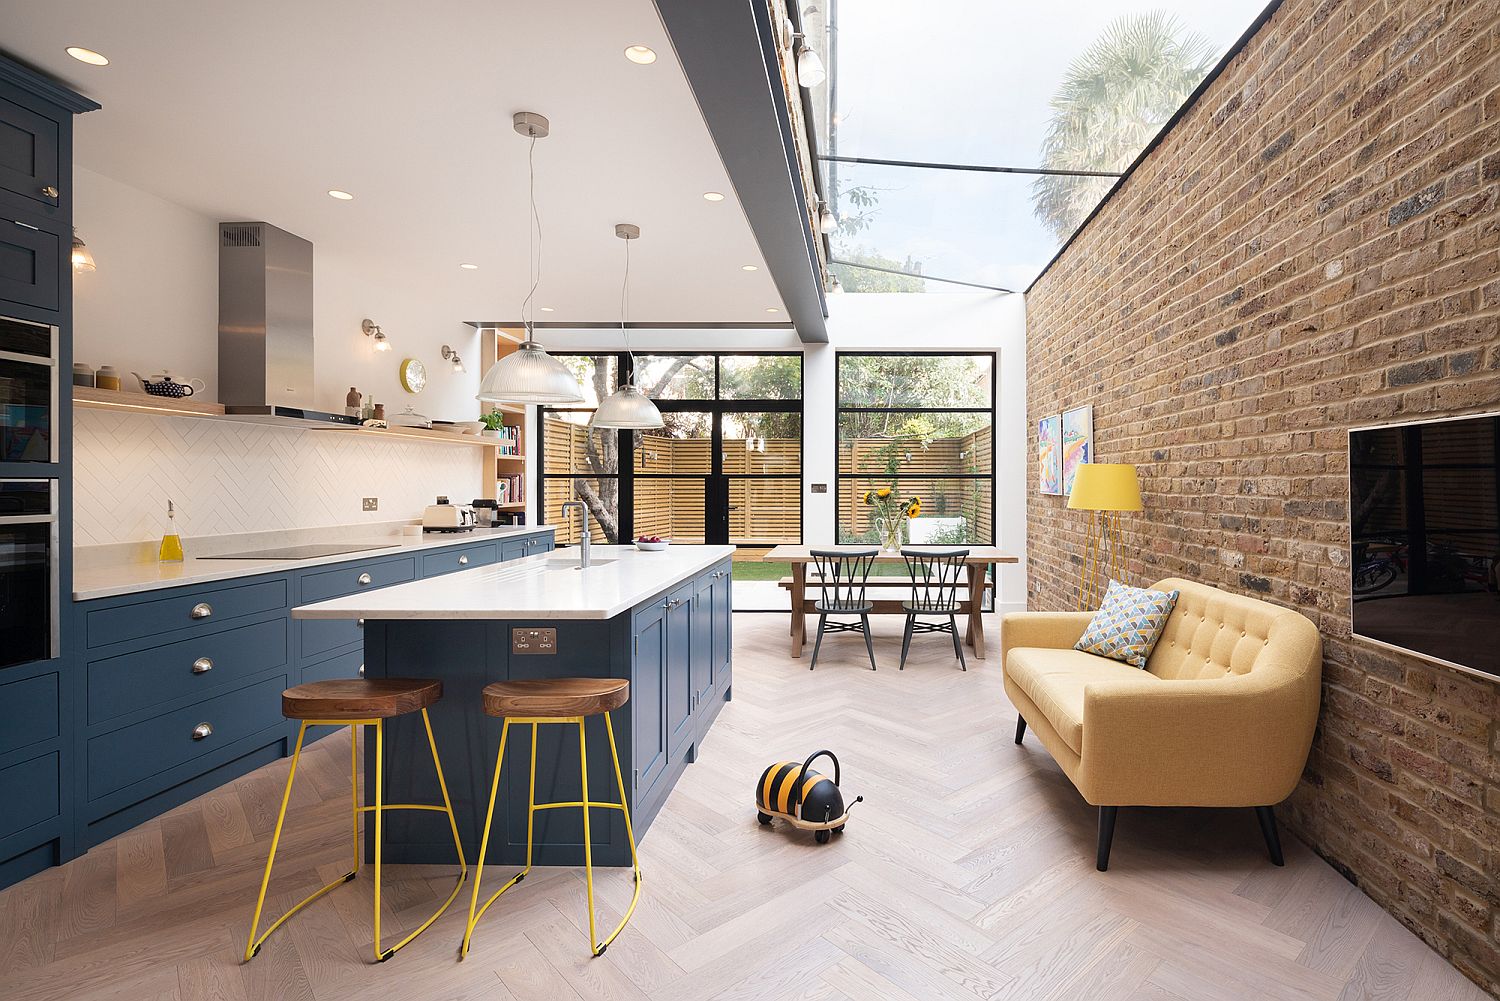 Polished-finishes-are-combined-with-exposed-brick-wall-inside-Chivalry-Road-Residence-in-South-West-London-45570